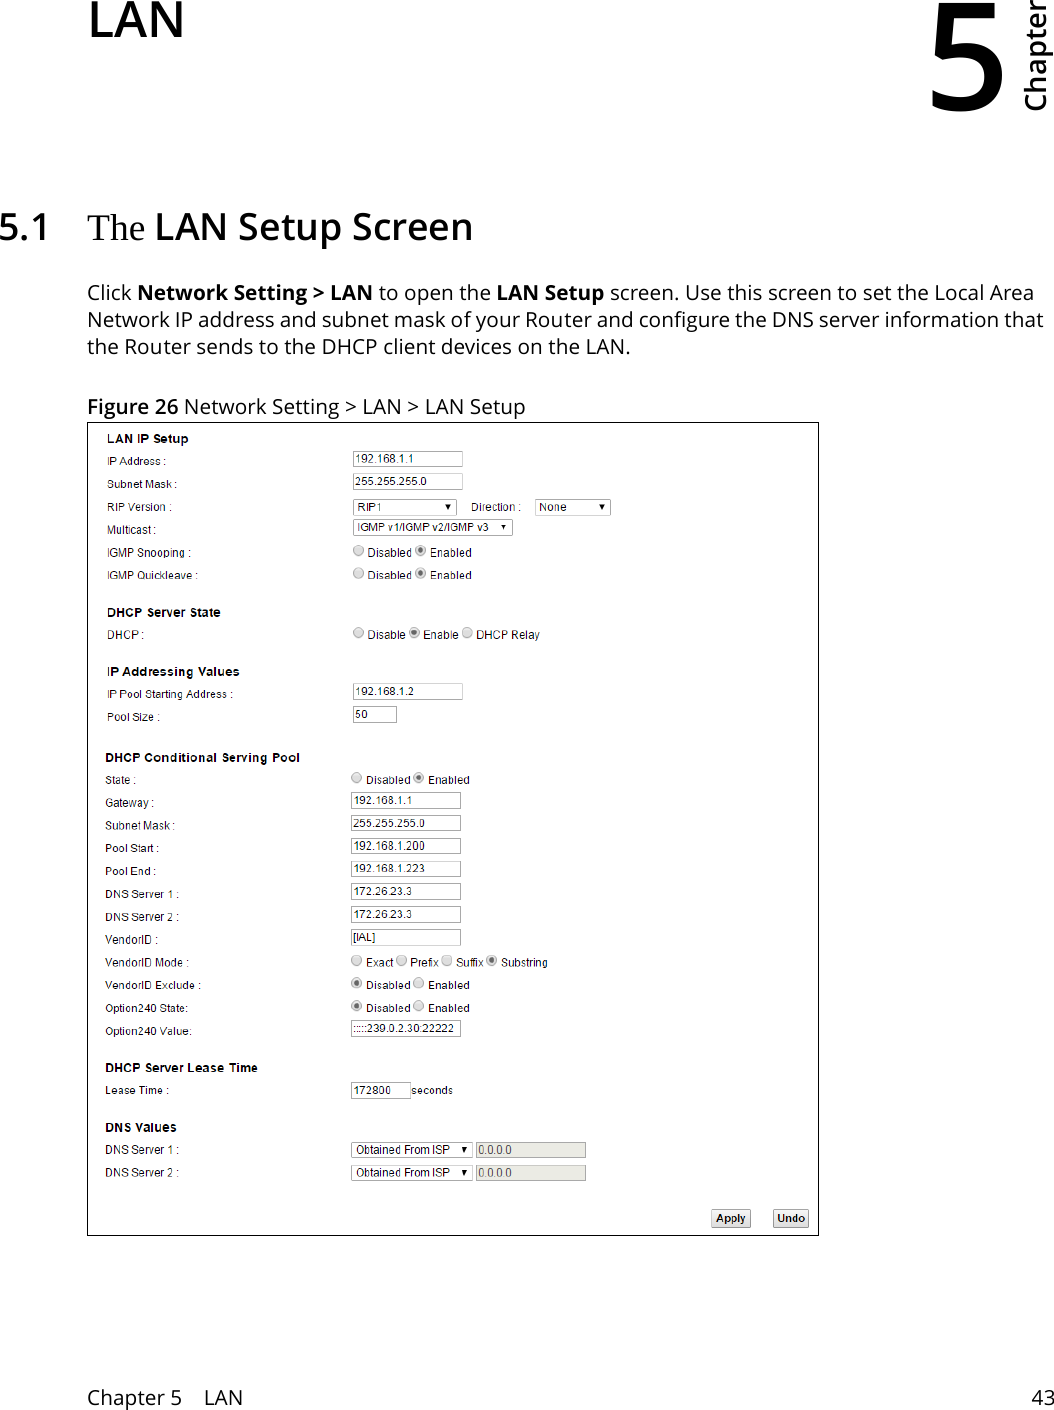 5Chapter Chapter 5    LAN 43CHAPTER 5 Chapter 5 LAN5.1   The LAN Setup ScreenClick Network Setting &gt; LAN to open the LAN Setup screen. Use this screen to set the Local Area Network IP address and subnet mask of your Router and configure the DNS server information that the Router sends to the DHCP client devices on the LAN.Figure 26 Network Setting &gt; LAN &gt; LAN Setup 